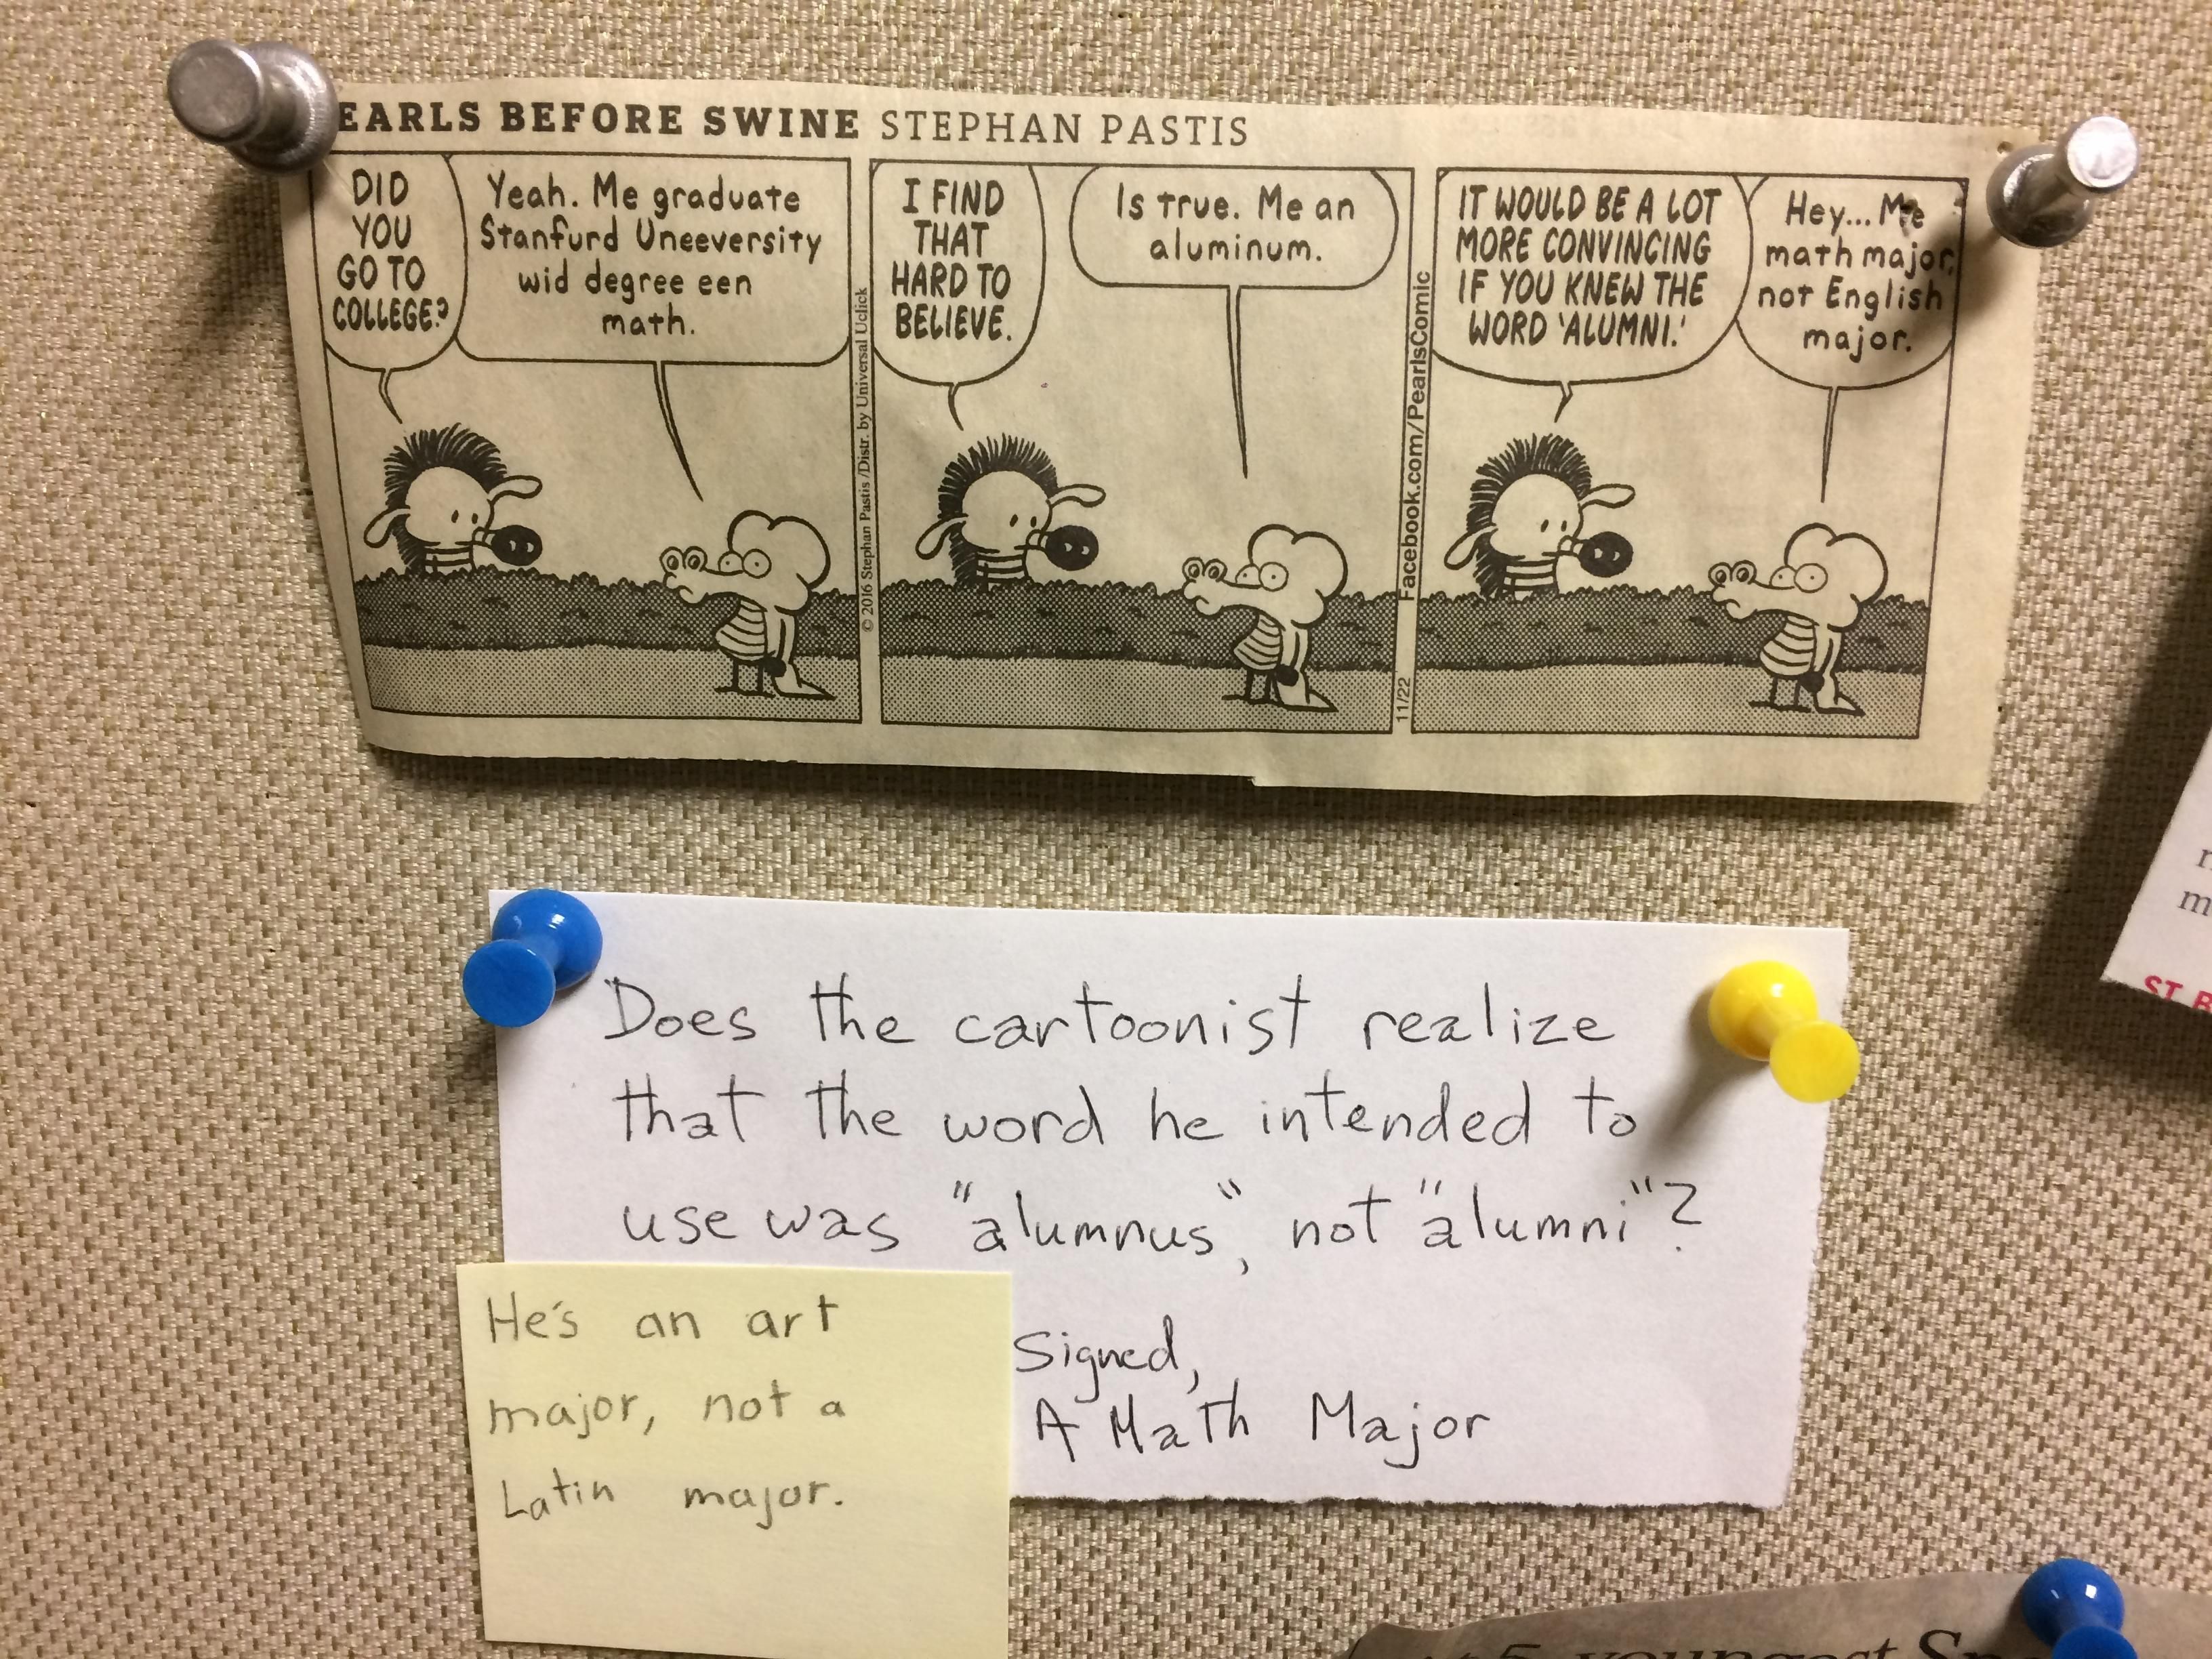 Found on a bulletin board at work.